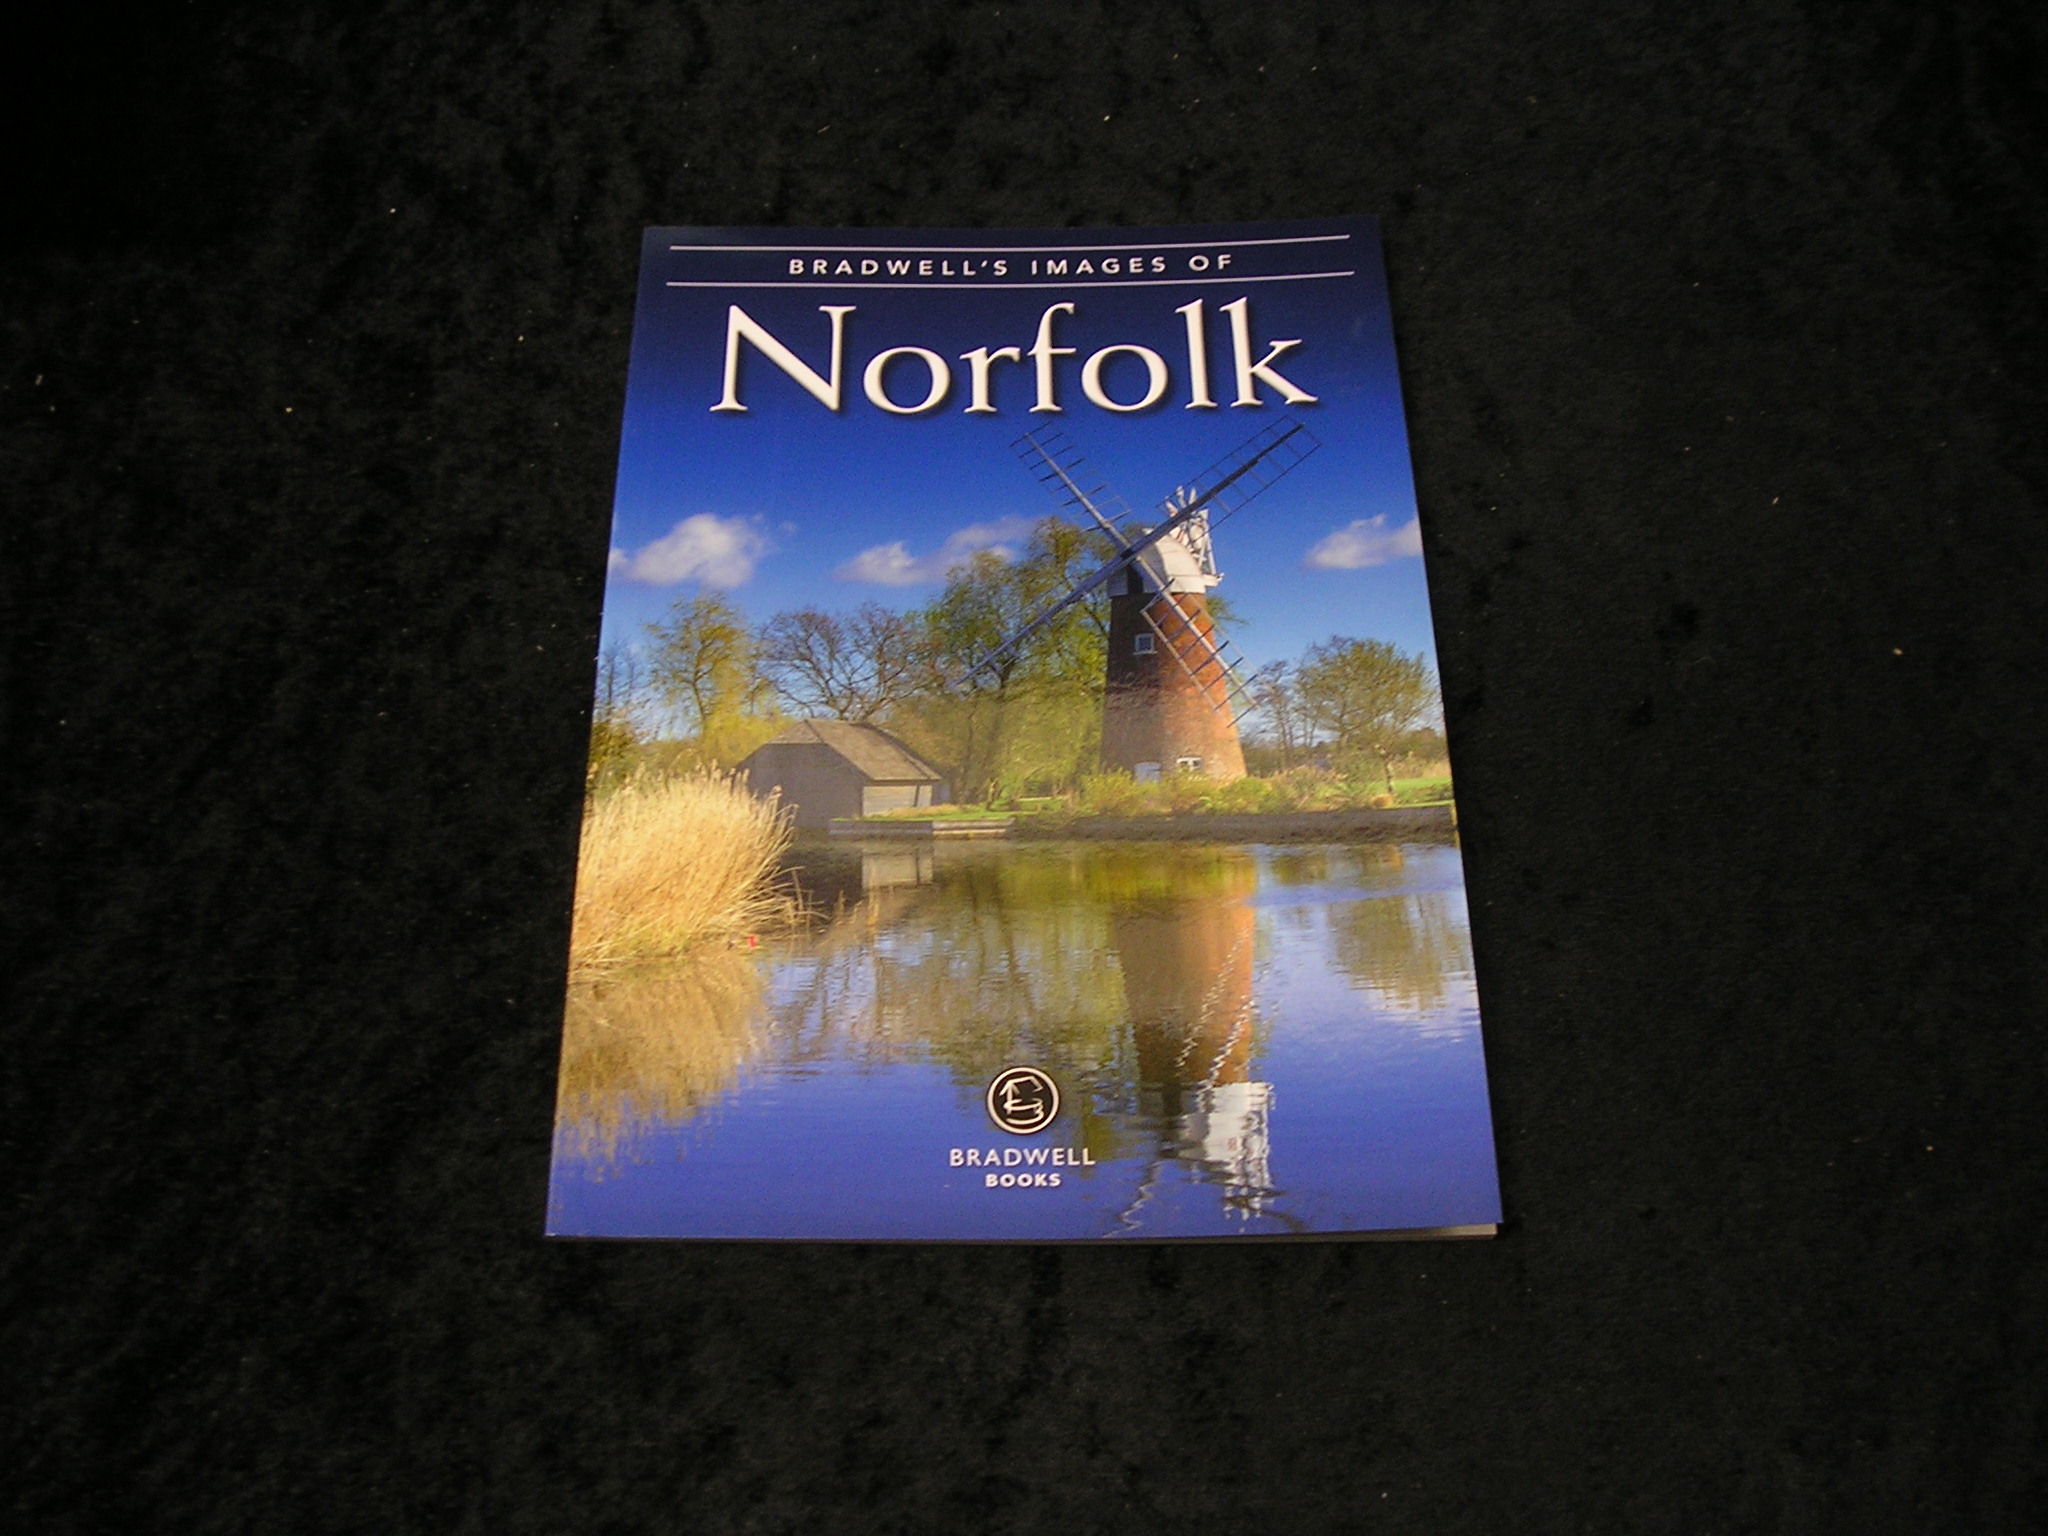 Bradwell's Images of Norfolk